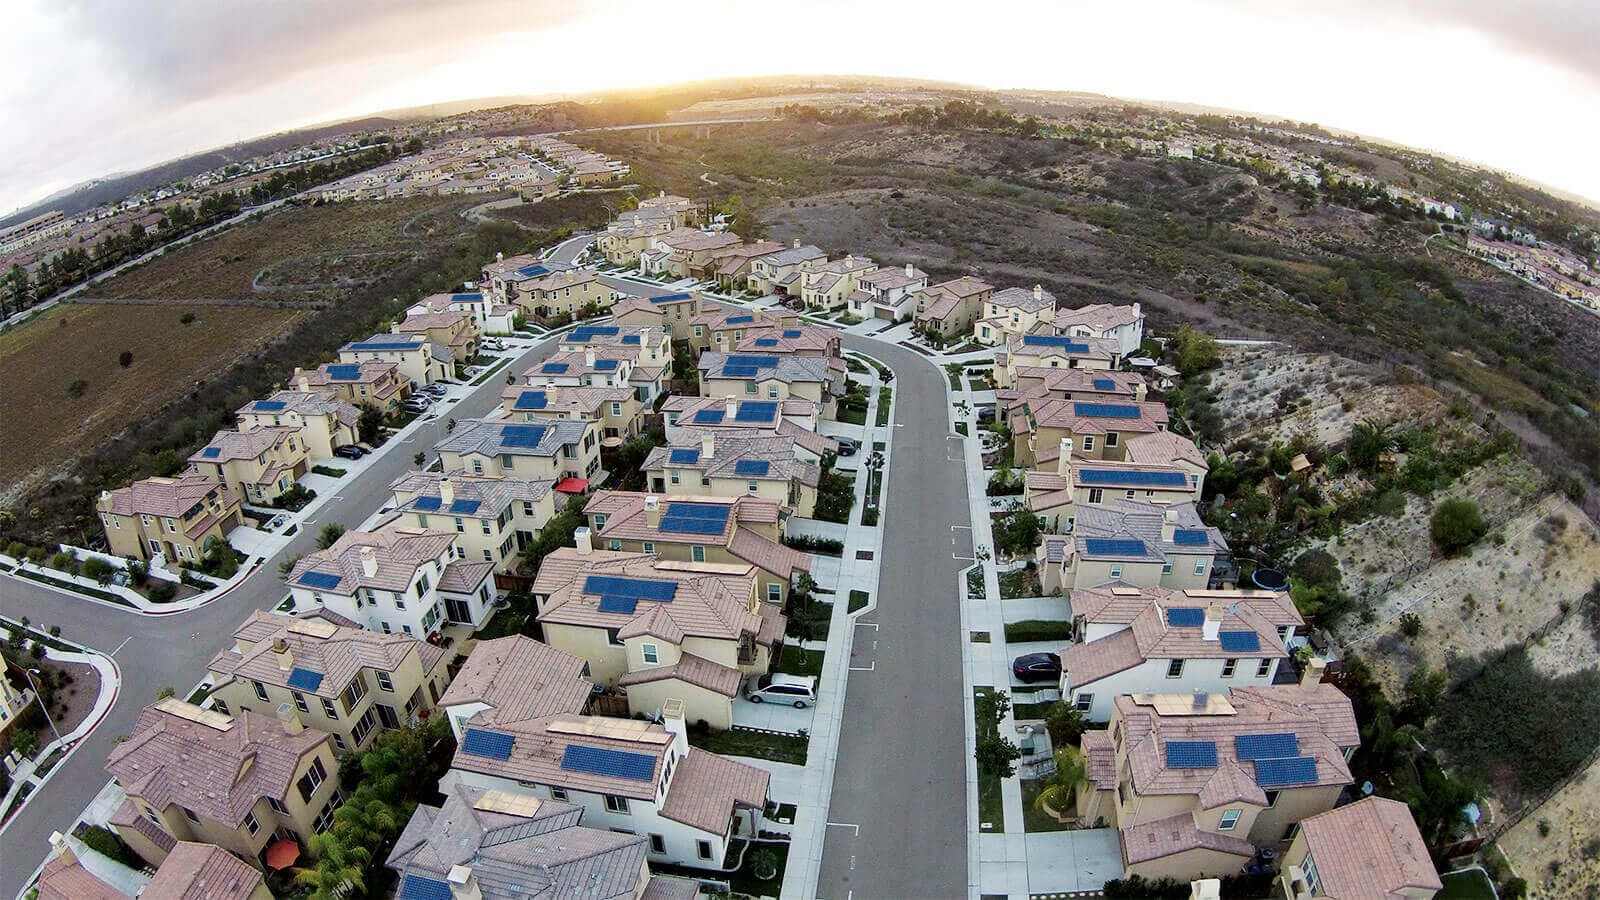 Aerial photograph of rooftop solar powered community